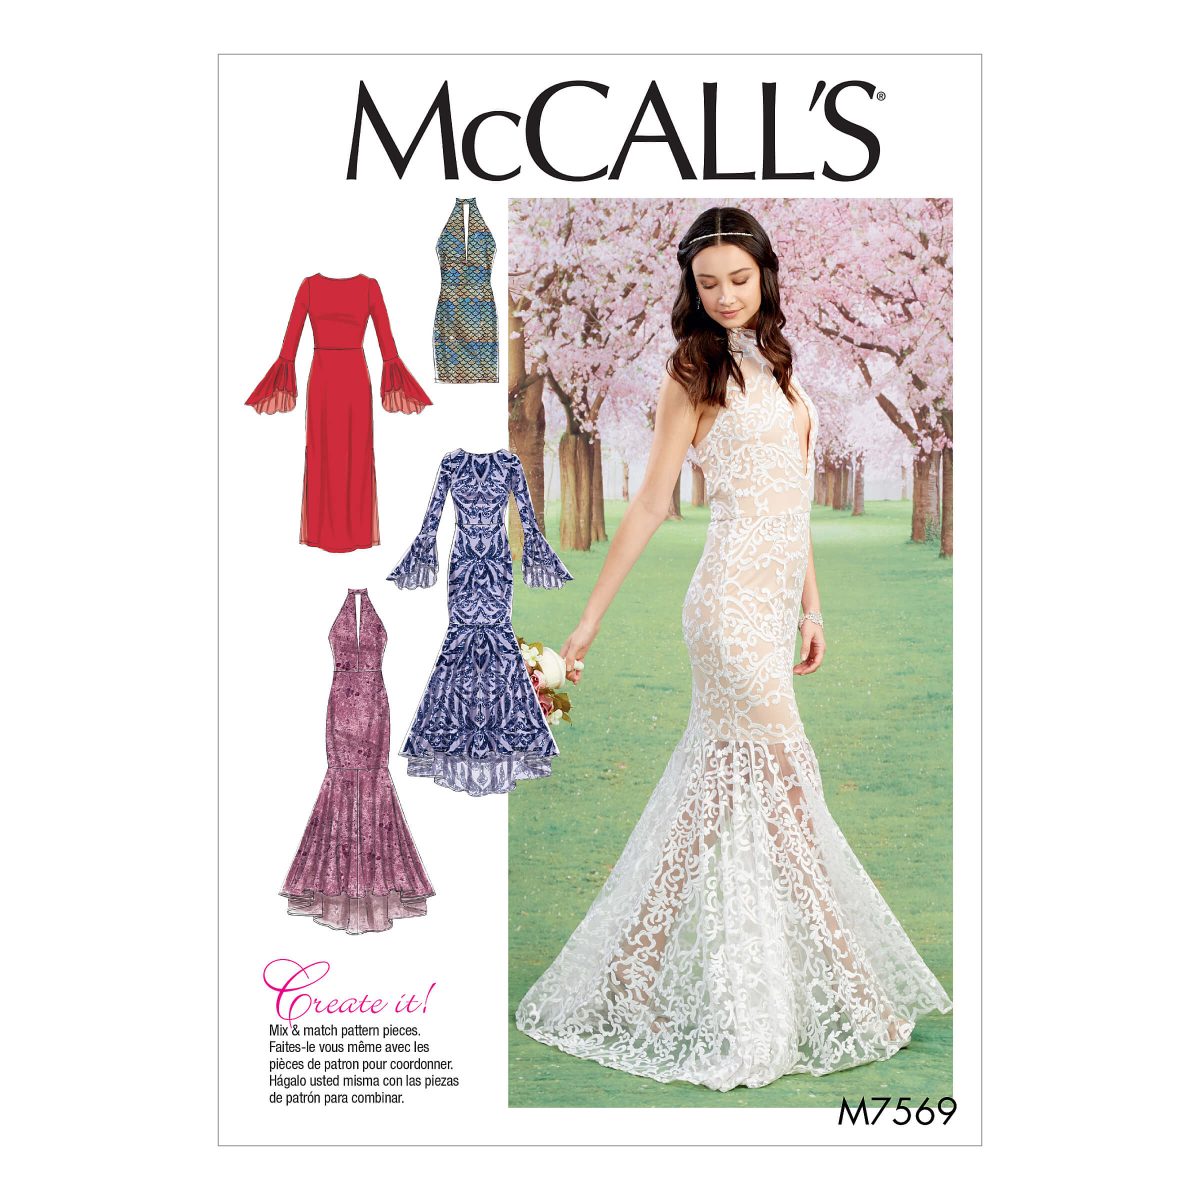 McCall's Sewing Pattern M7569 Misses' Column and Mermaid-Style Dresses with Bodice and Sleeve Variations